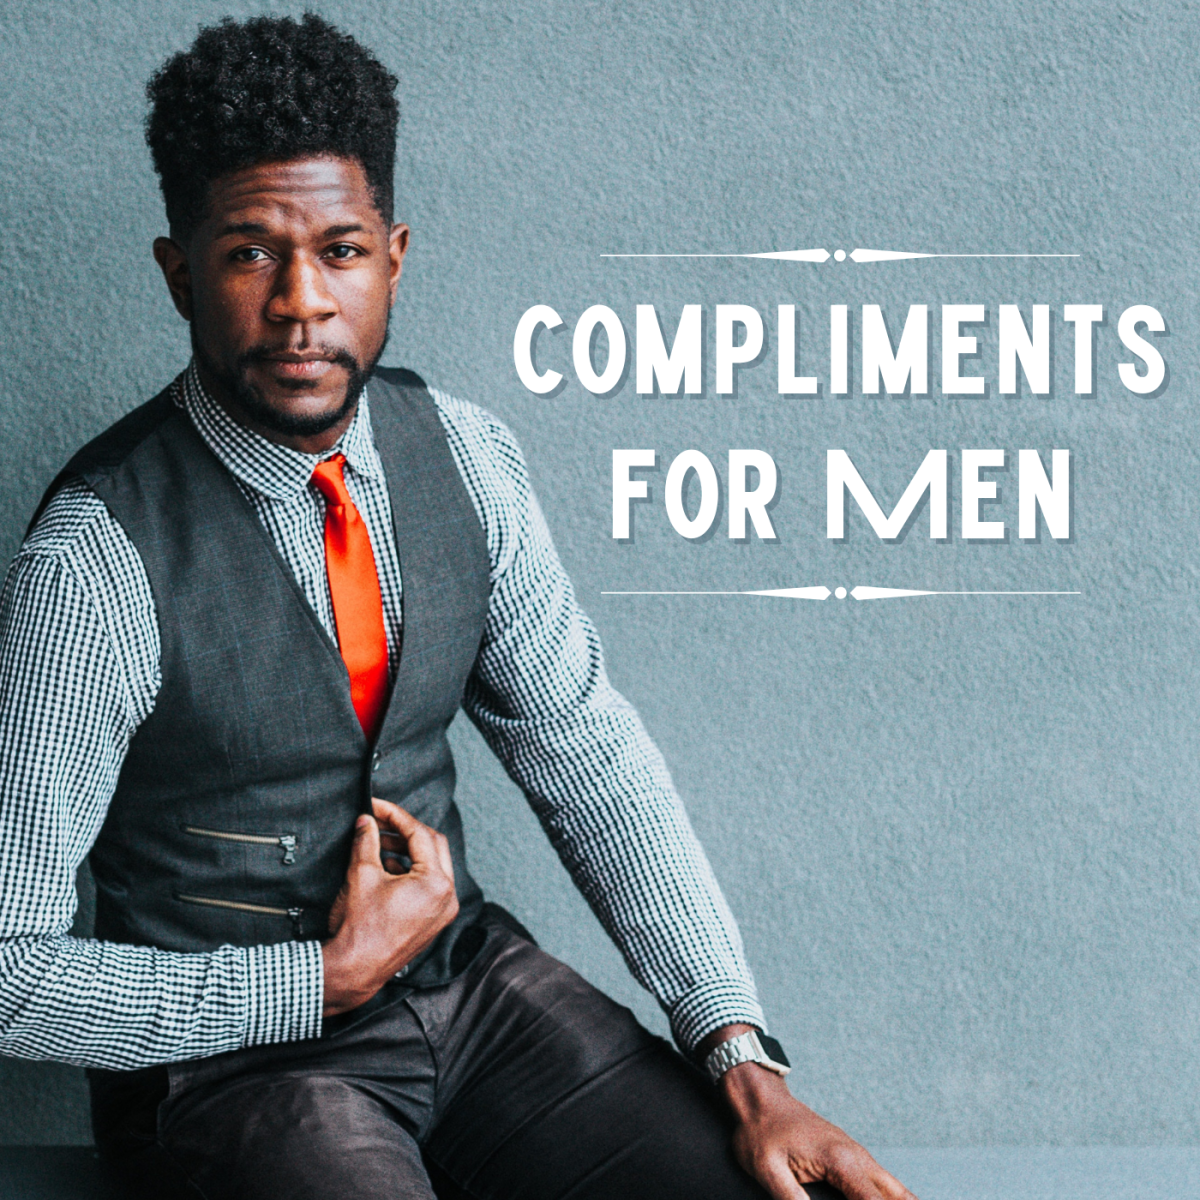 200+ Best Compliments for Guys - PairedLife